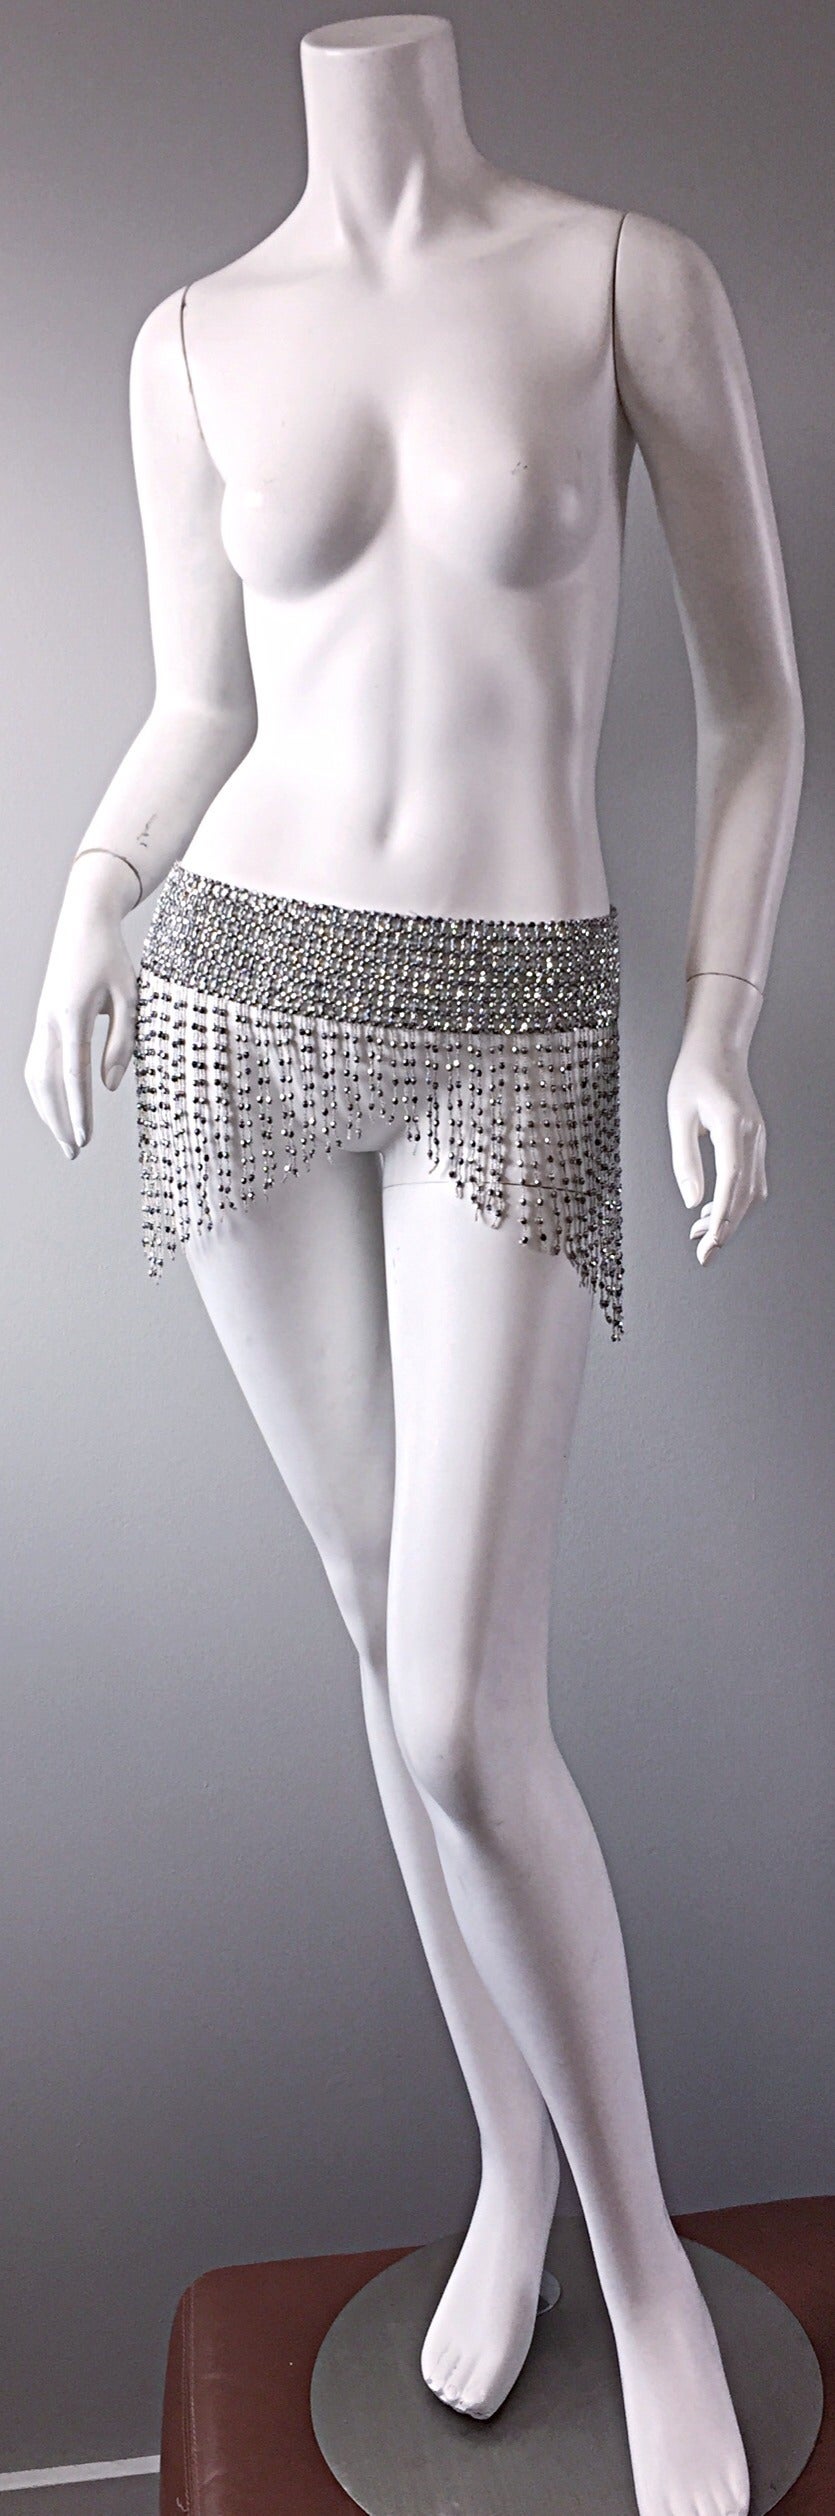 Awesome 1970s disco belt! Shiny rhinestones and beads that literally swing with motion! Intricate details. Looks great with jeans, leggings, a skirt, or simply over a dress. Two loops in the back for closure. Lots of stretch. 28-38 inch waist